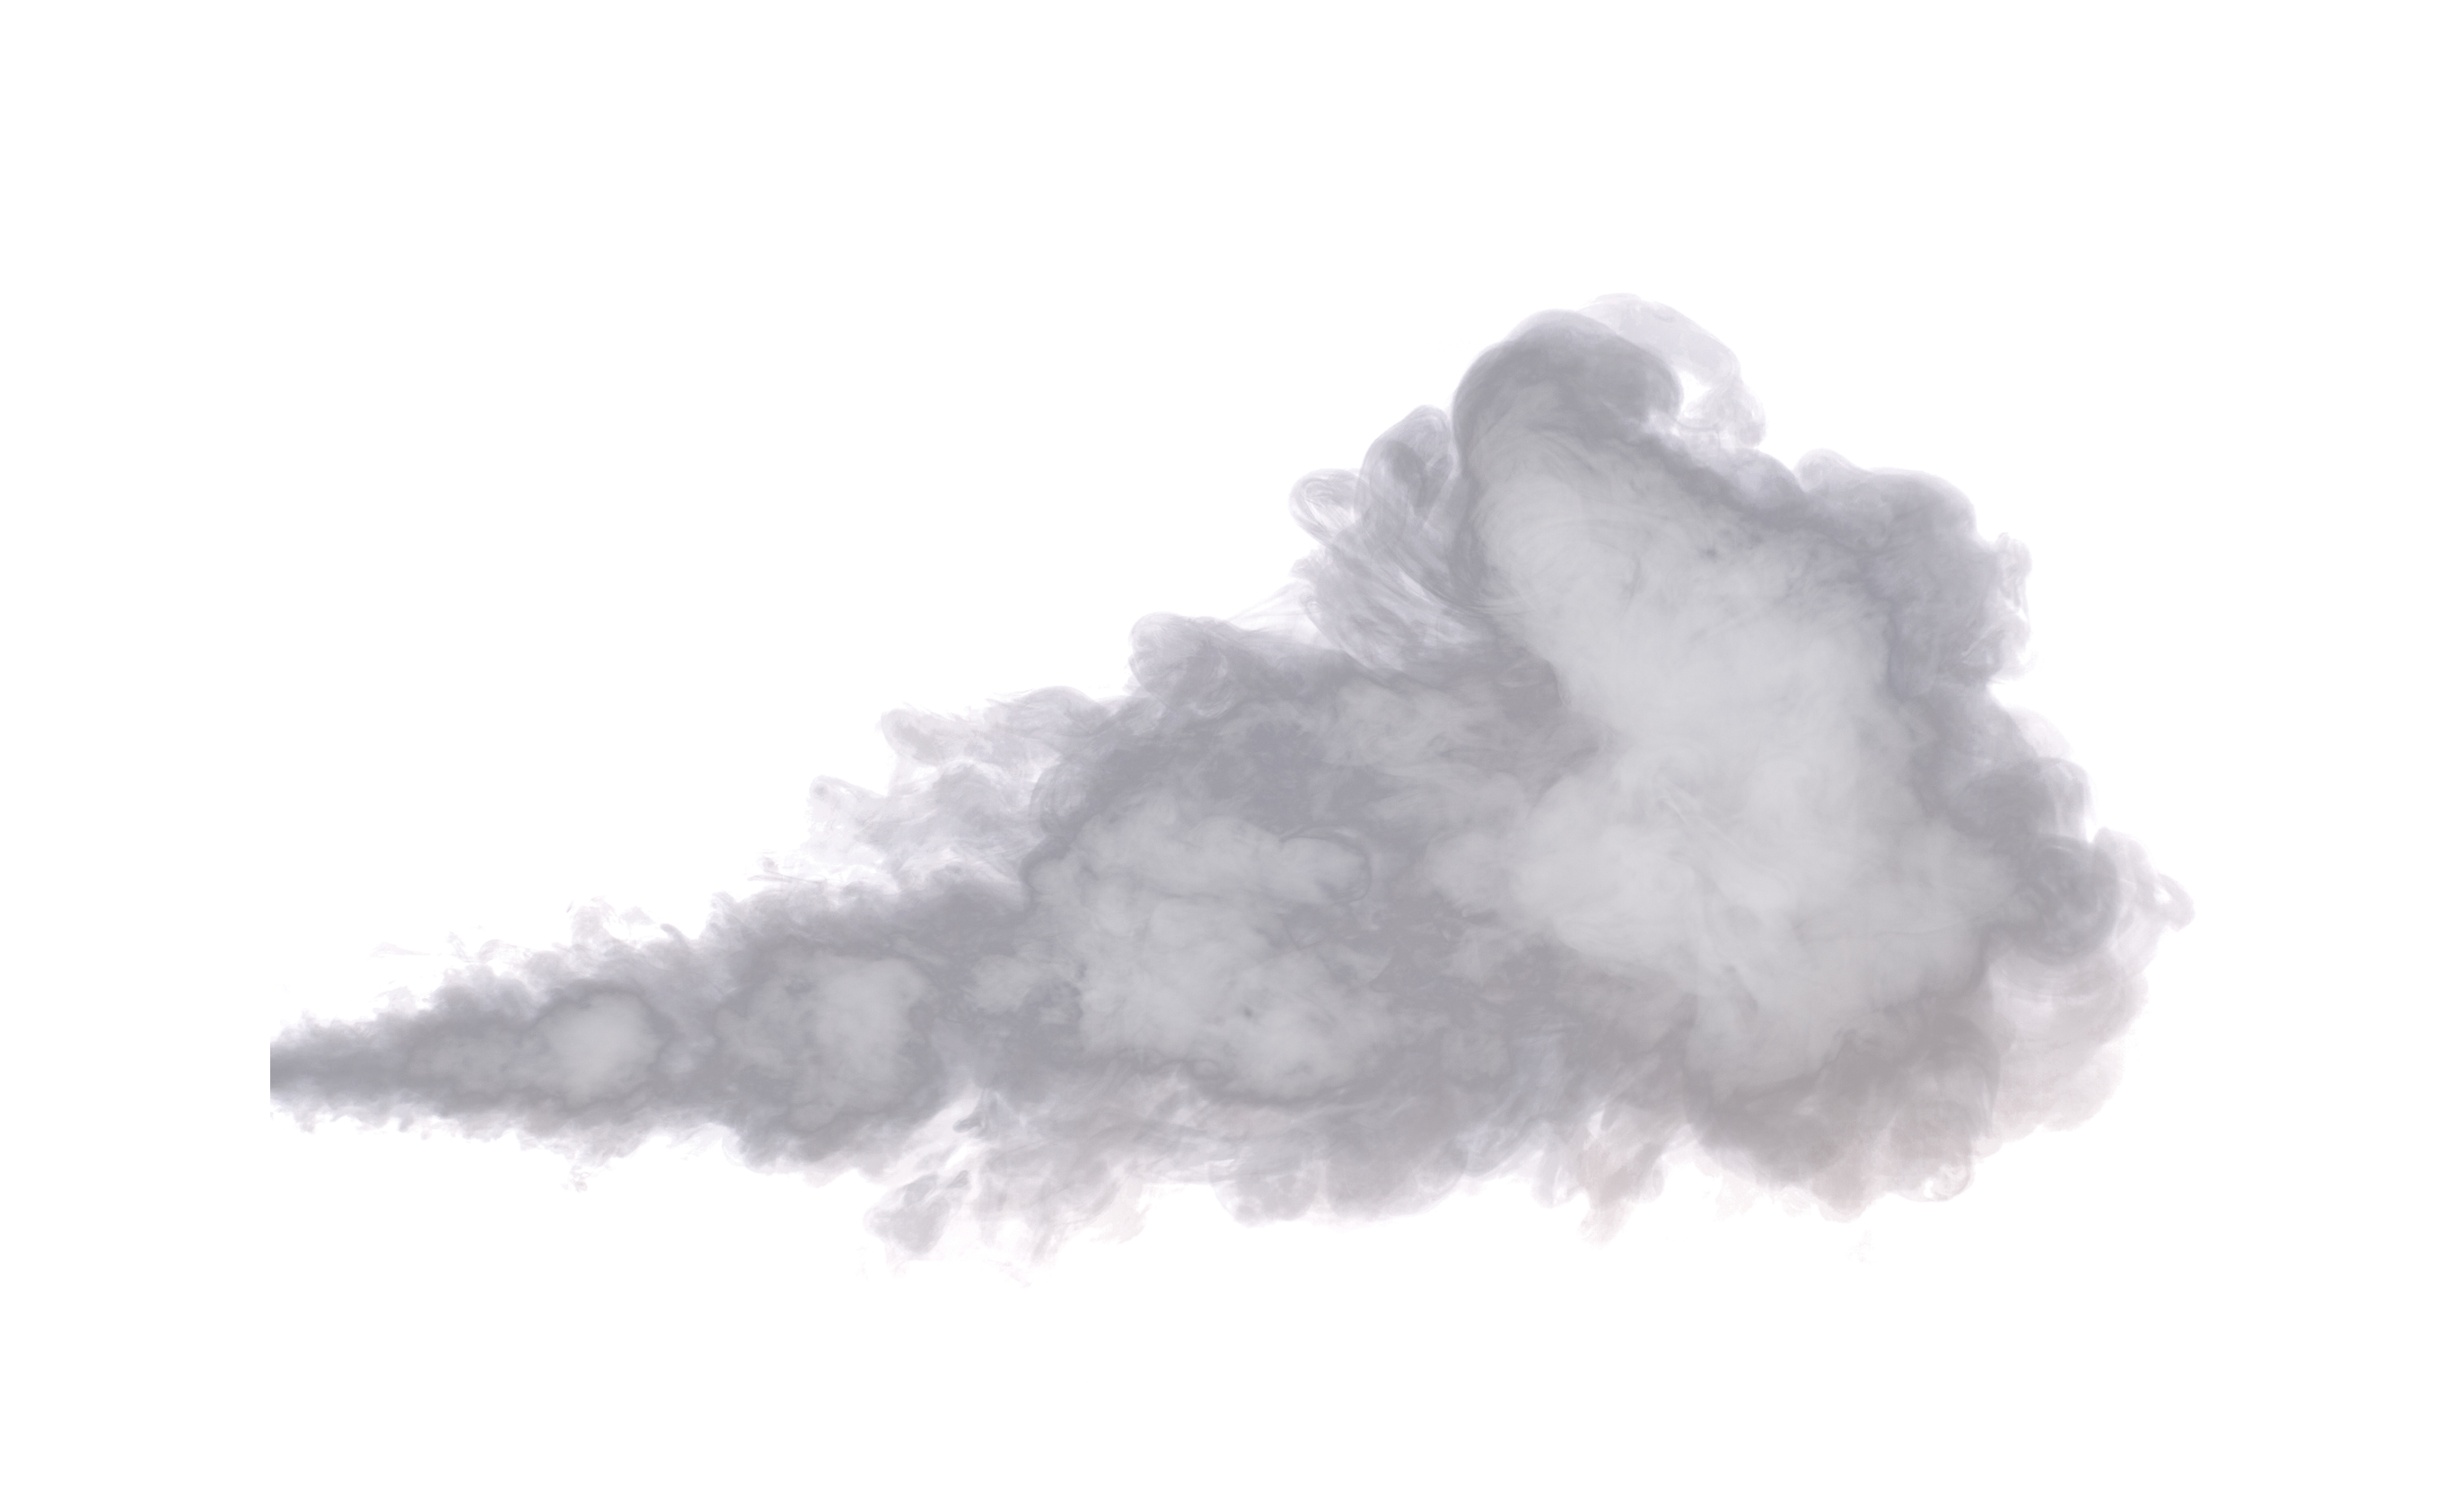 Smoke Effect PNG Picture